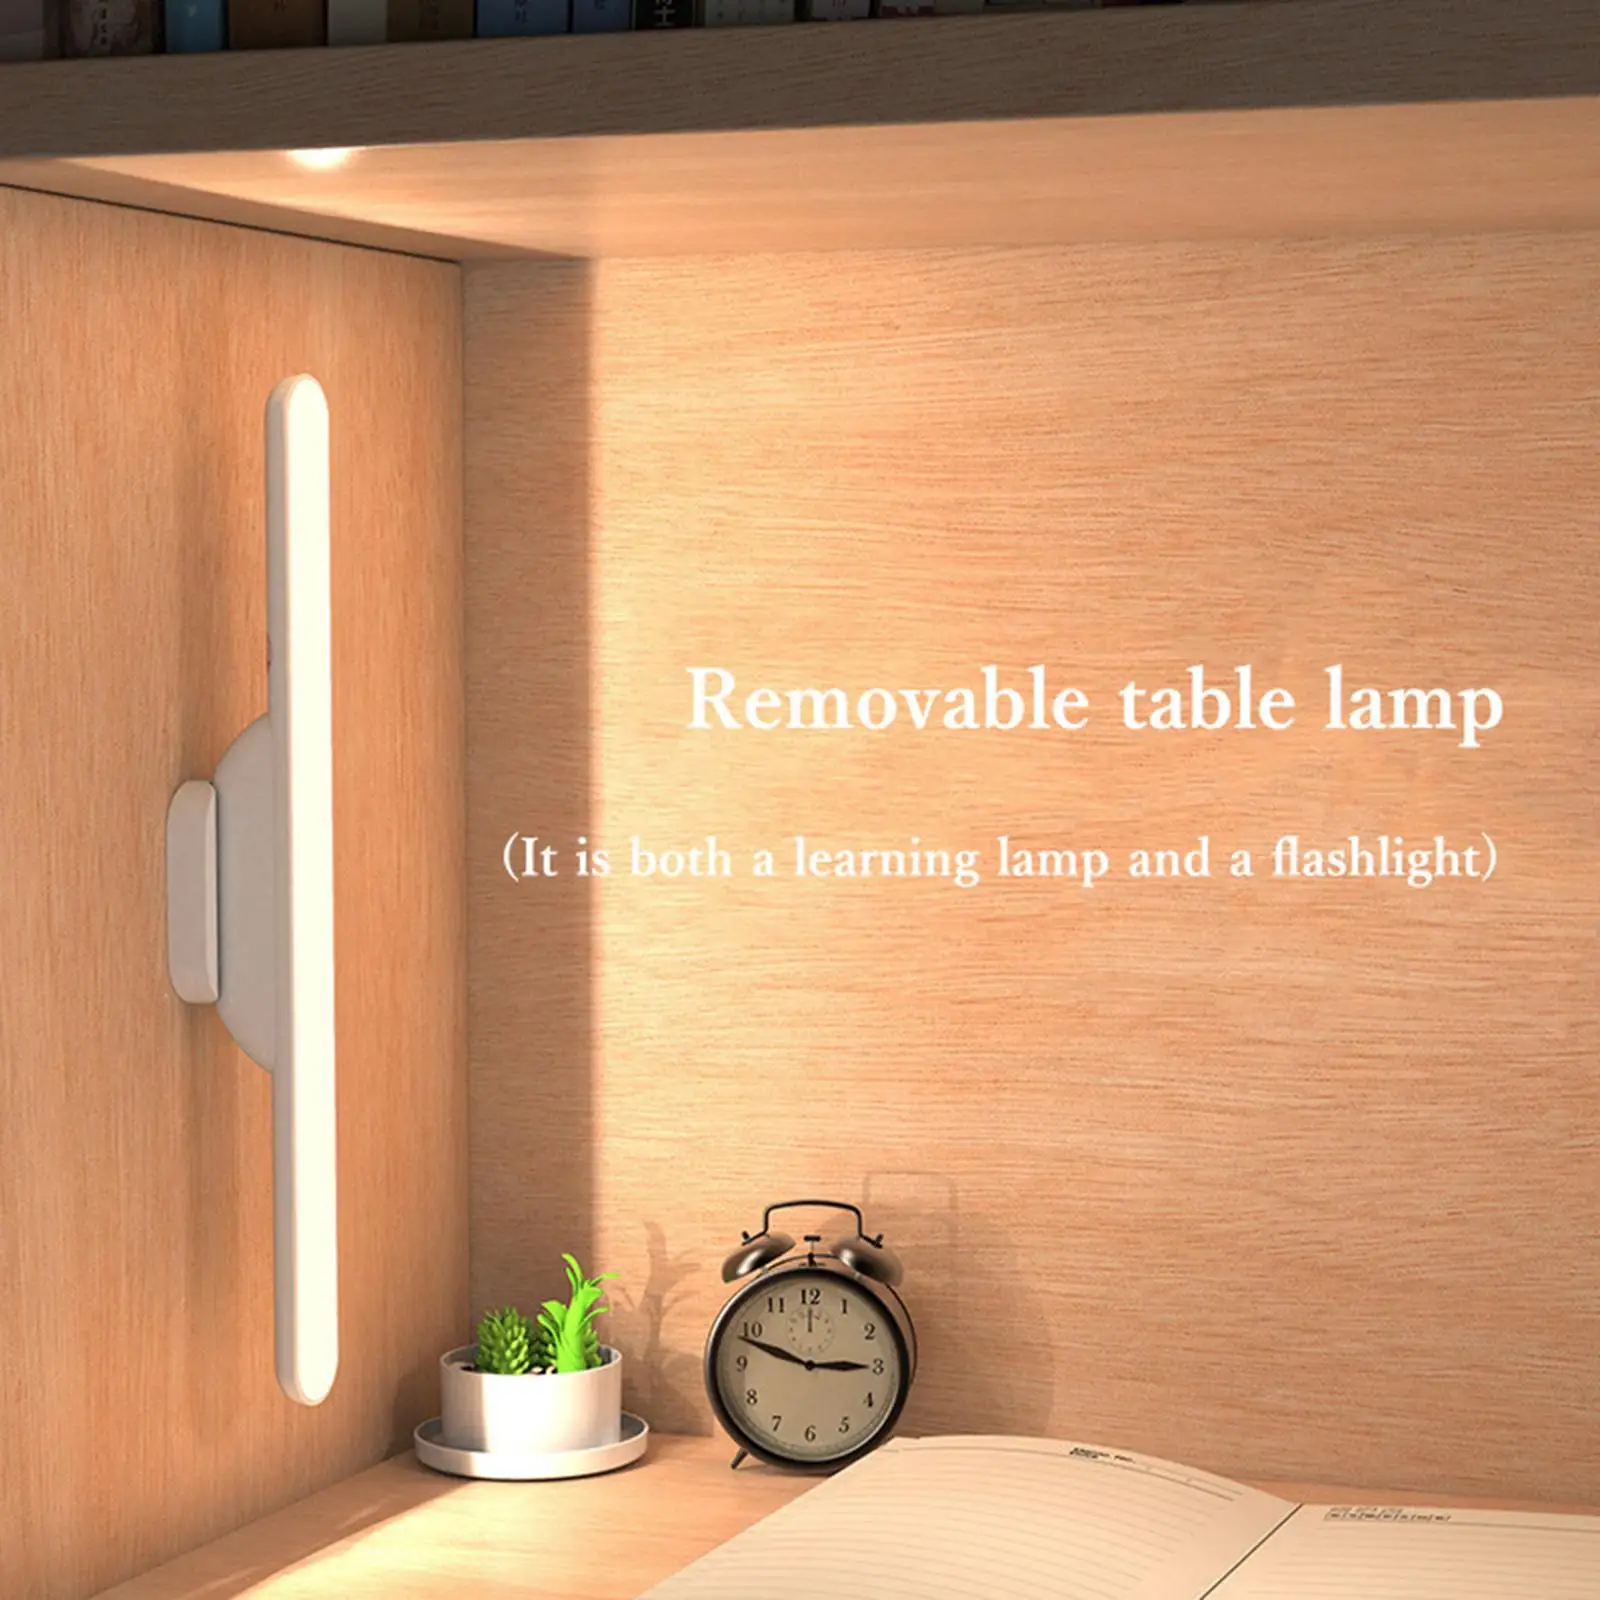 Wall Reading Light Stick LED Dimmable Table Lamp Magnetic Dimming Bar for Reading Mirror Dorm Study Room Bedside